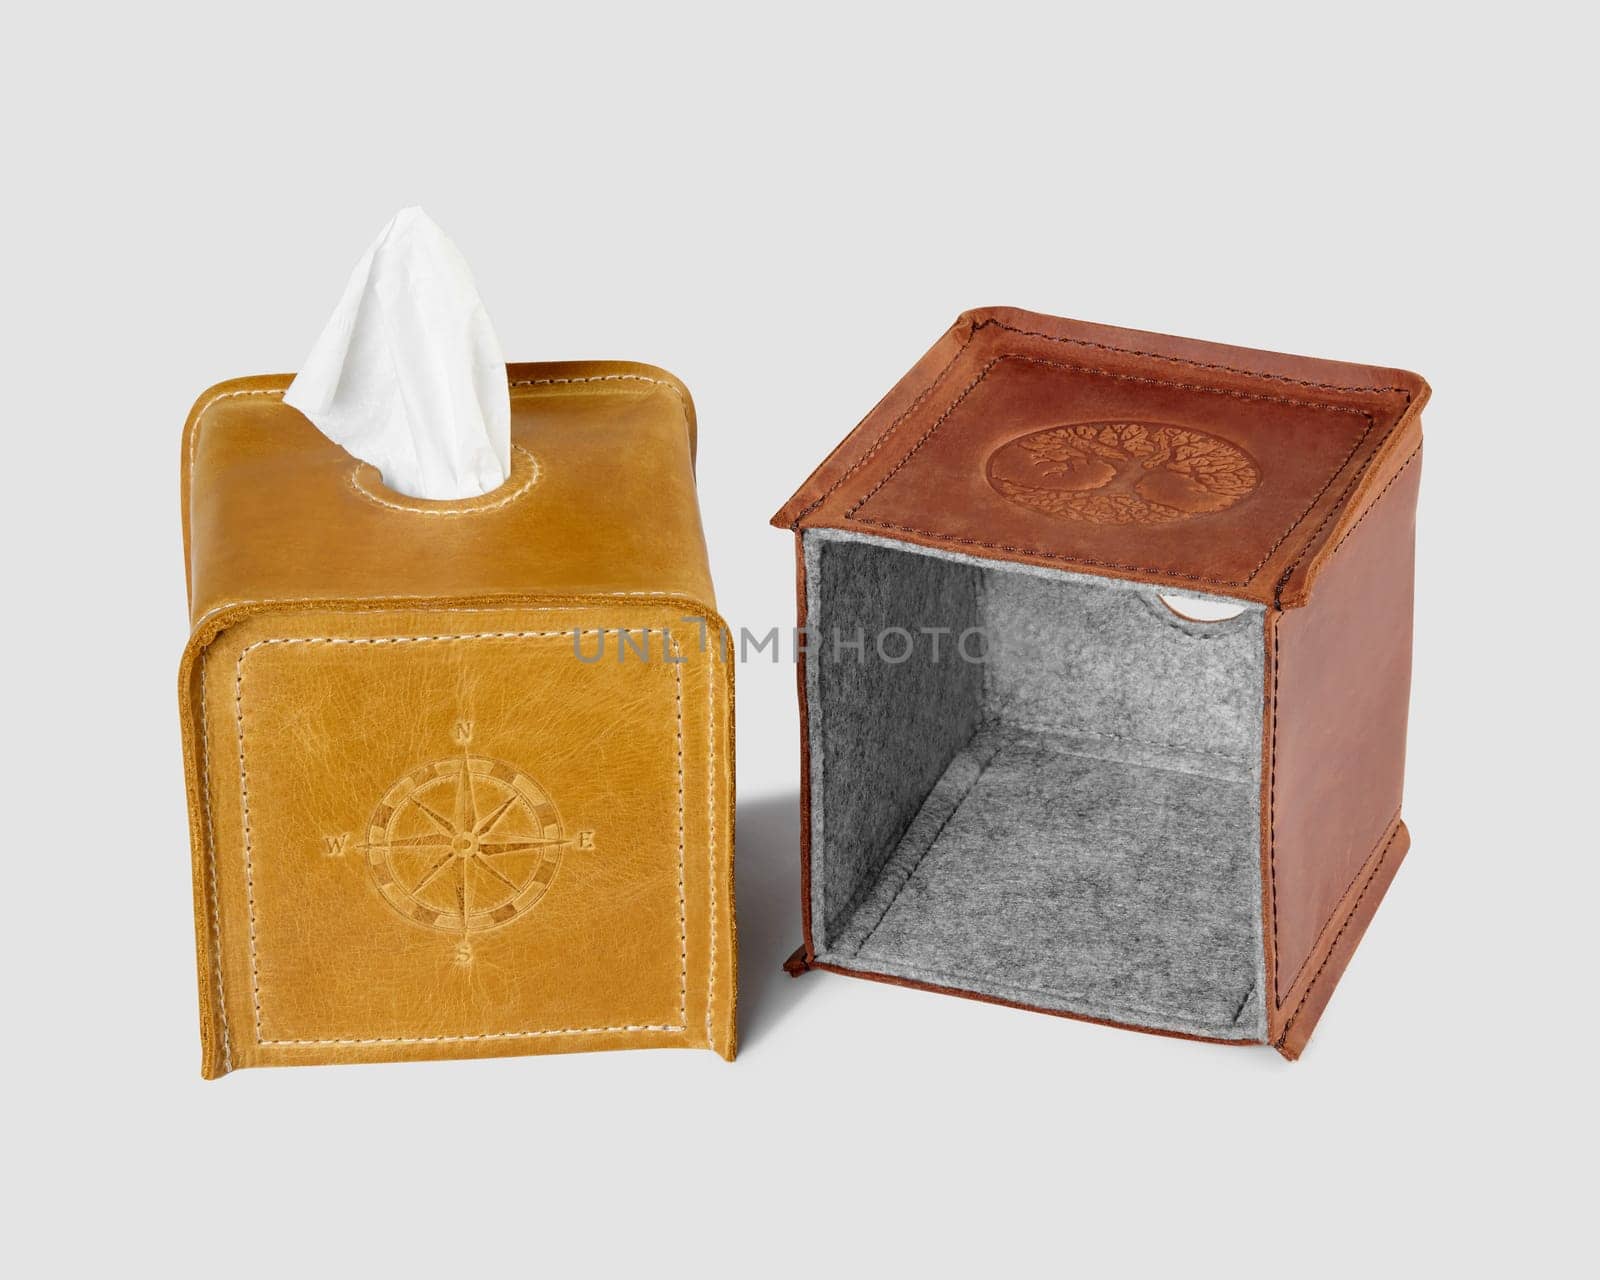 Handcrafted leather tissue box covers with embossing and felt lining by nazarovsergey